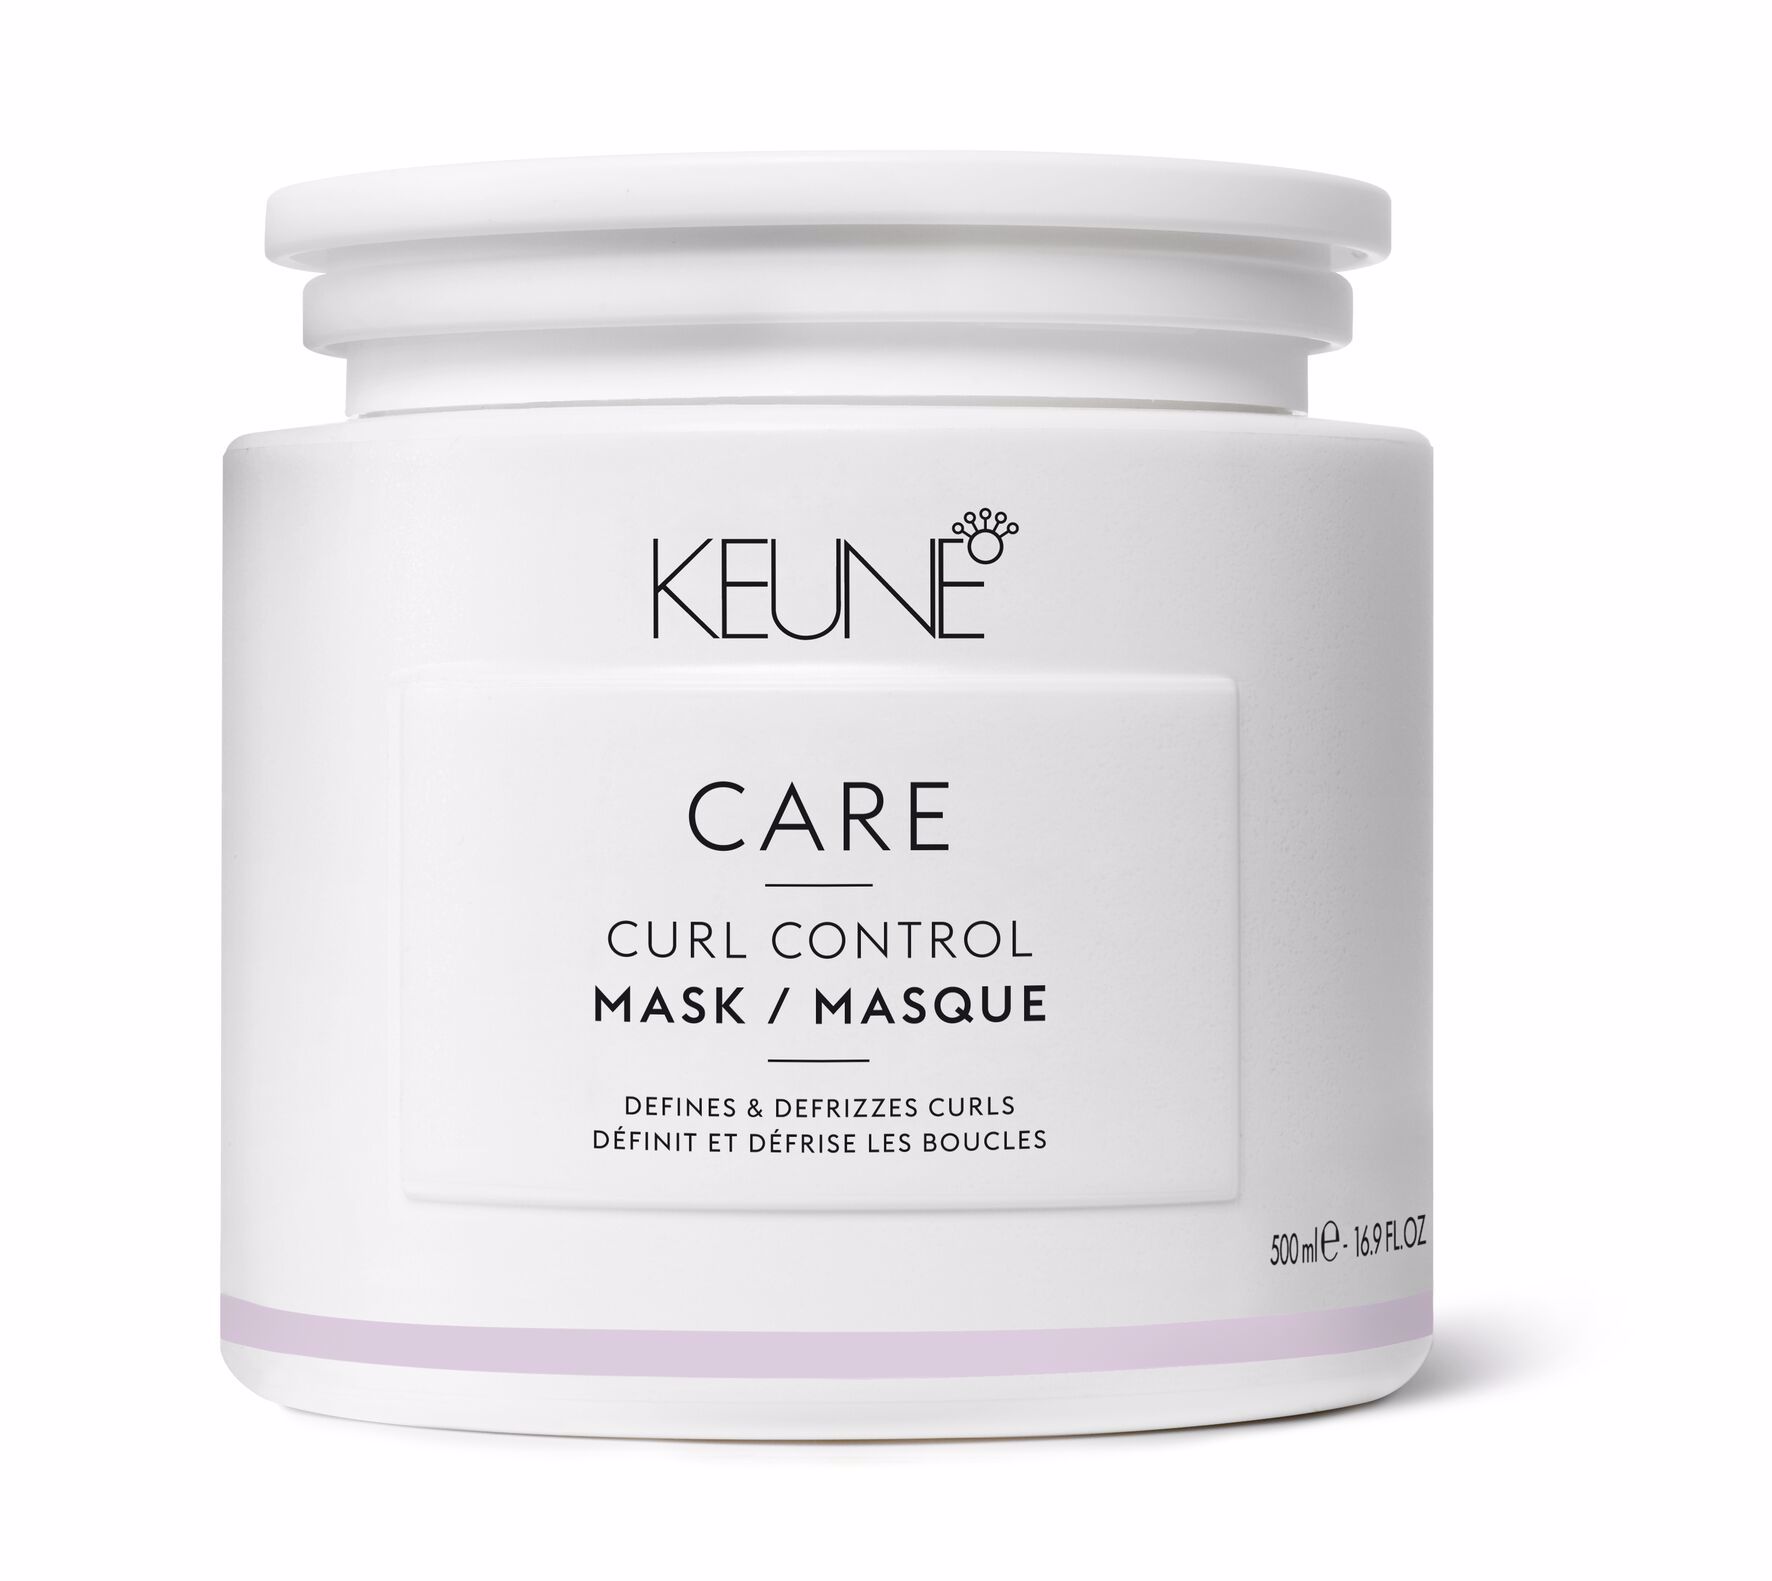 CARE CURL CONTROL MASK is a luxurious hair care product that deeply moisturizes dry, curly hair, creating smooth, bouncy curls without frizz. On keune.ch.